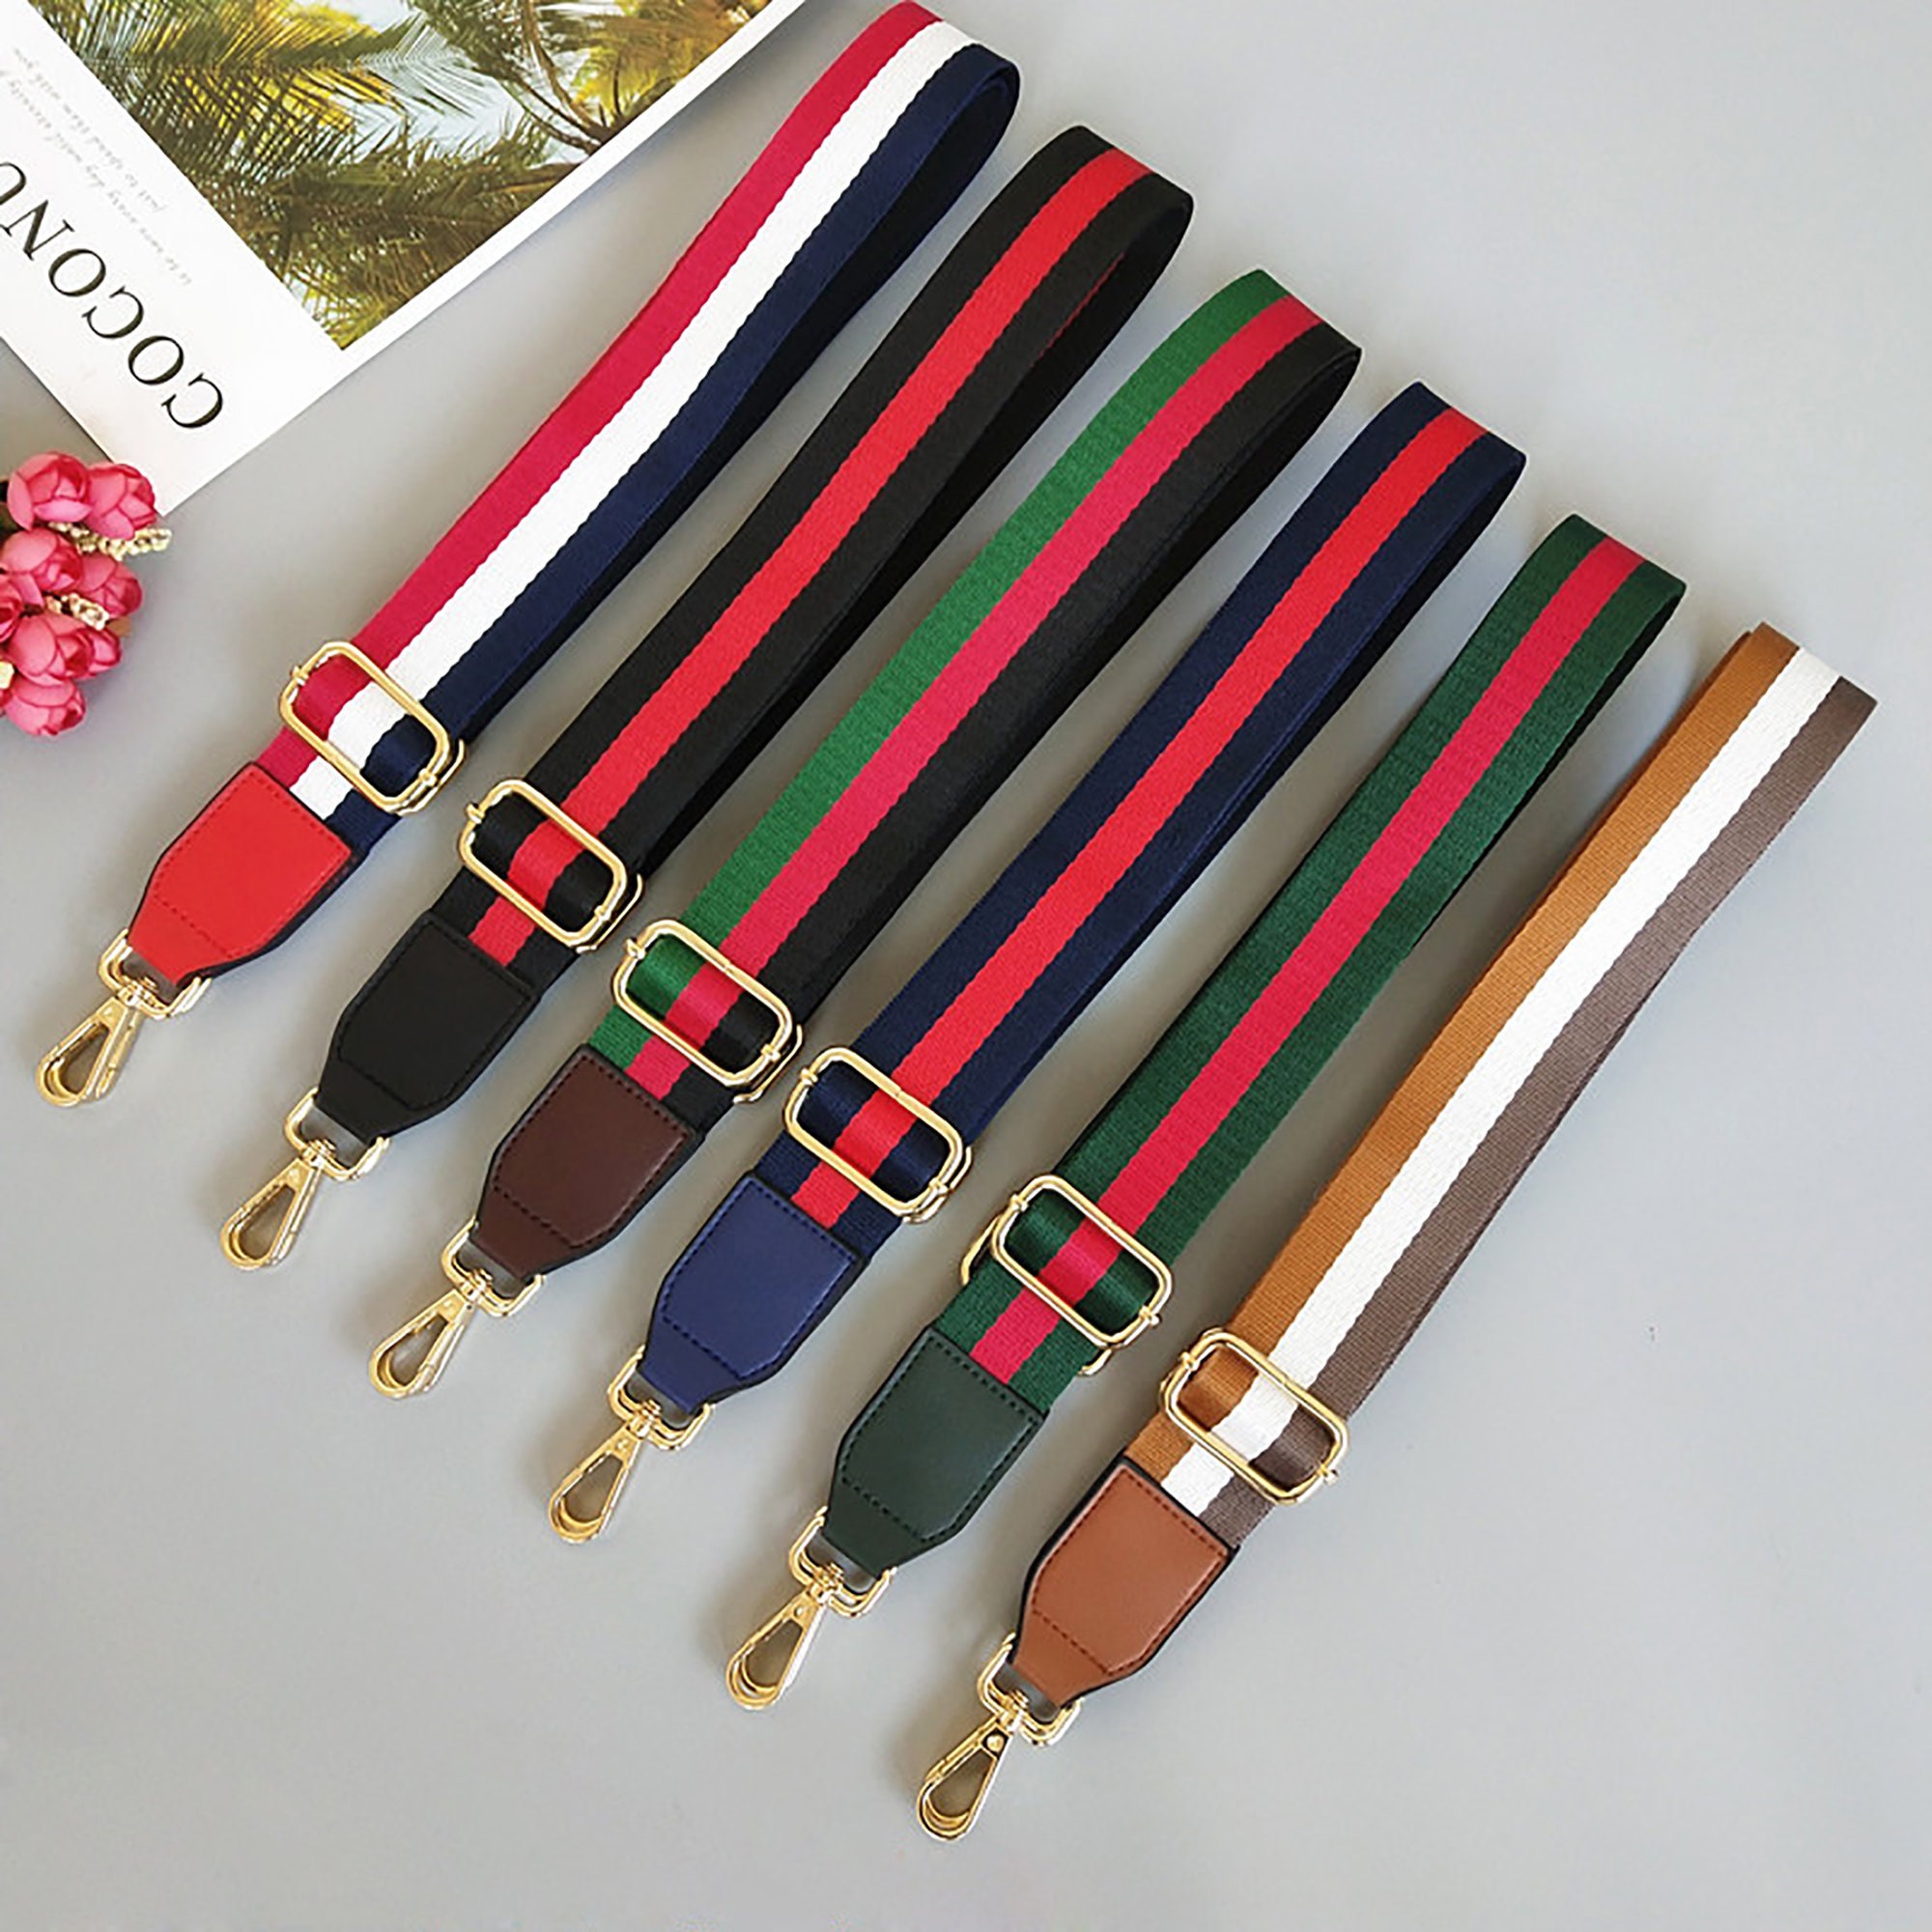 Purse Strap Replacement Crossbody Colorful Bag Strap Designer Large Wide  Canvas Fabric Strap Messeng…See more Purse Strap Replacement Crossbody